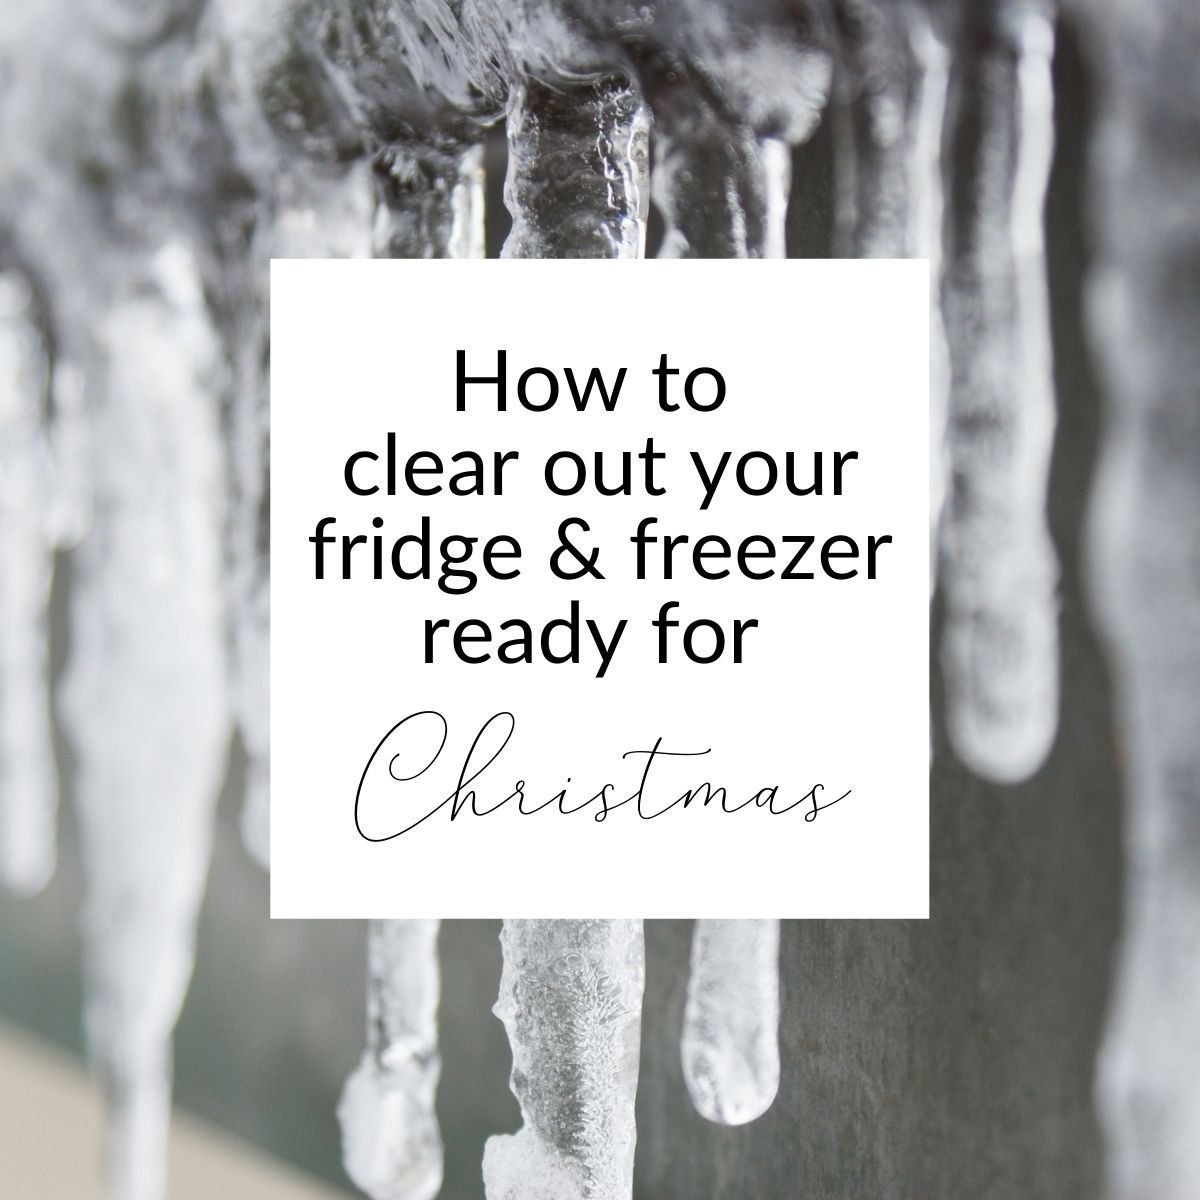 How to clear out your fridge and freezer ready for Christmas